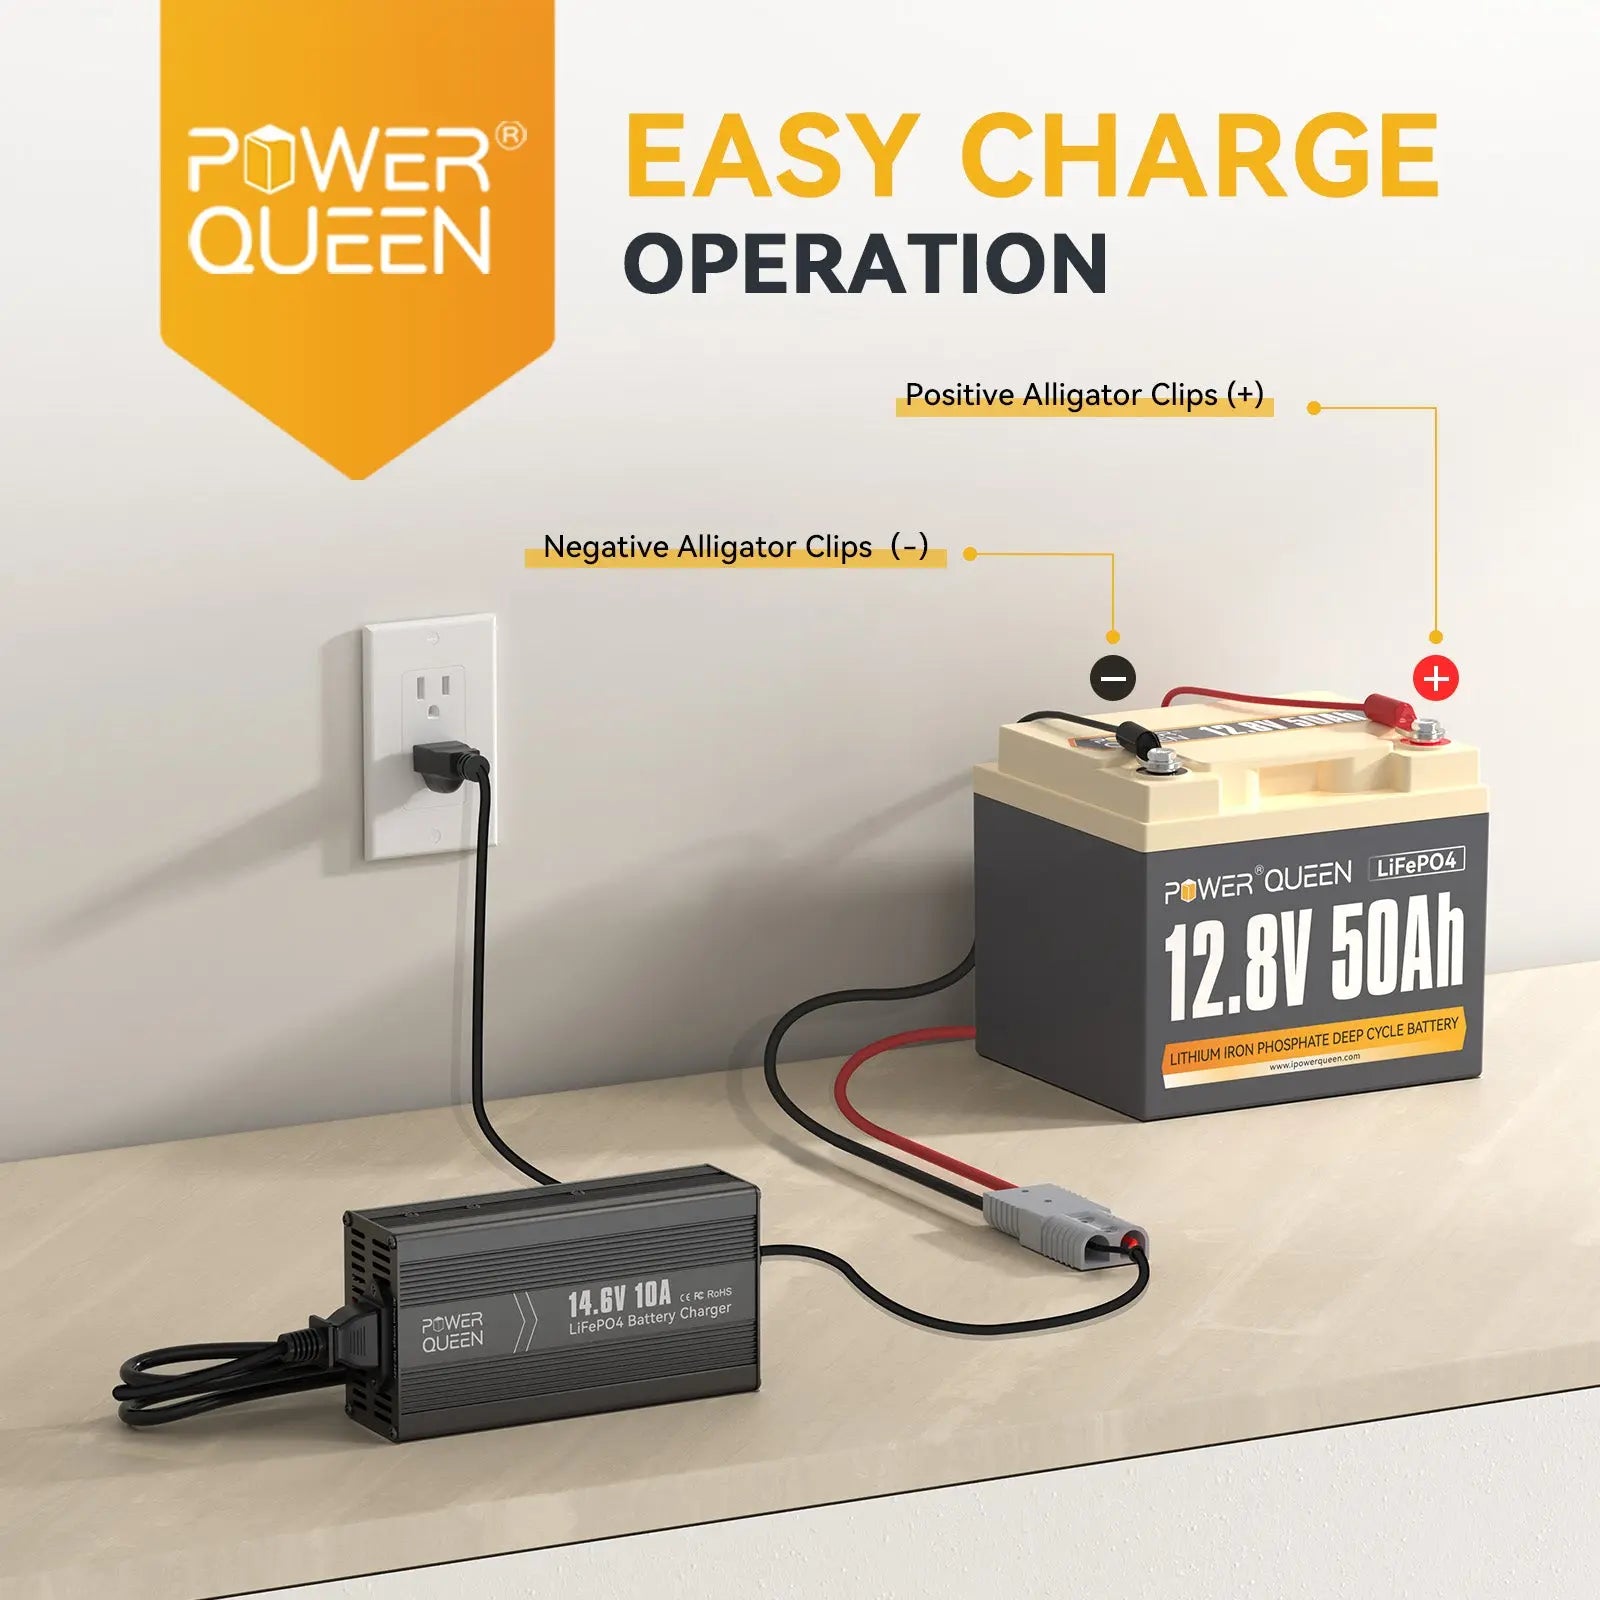 Power Queen 14.6V 10A LiFePO4 Battery Charger freeshipping - ipowerqueen